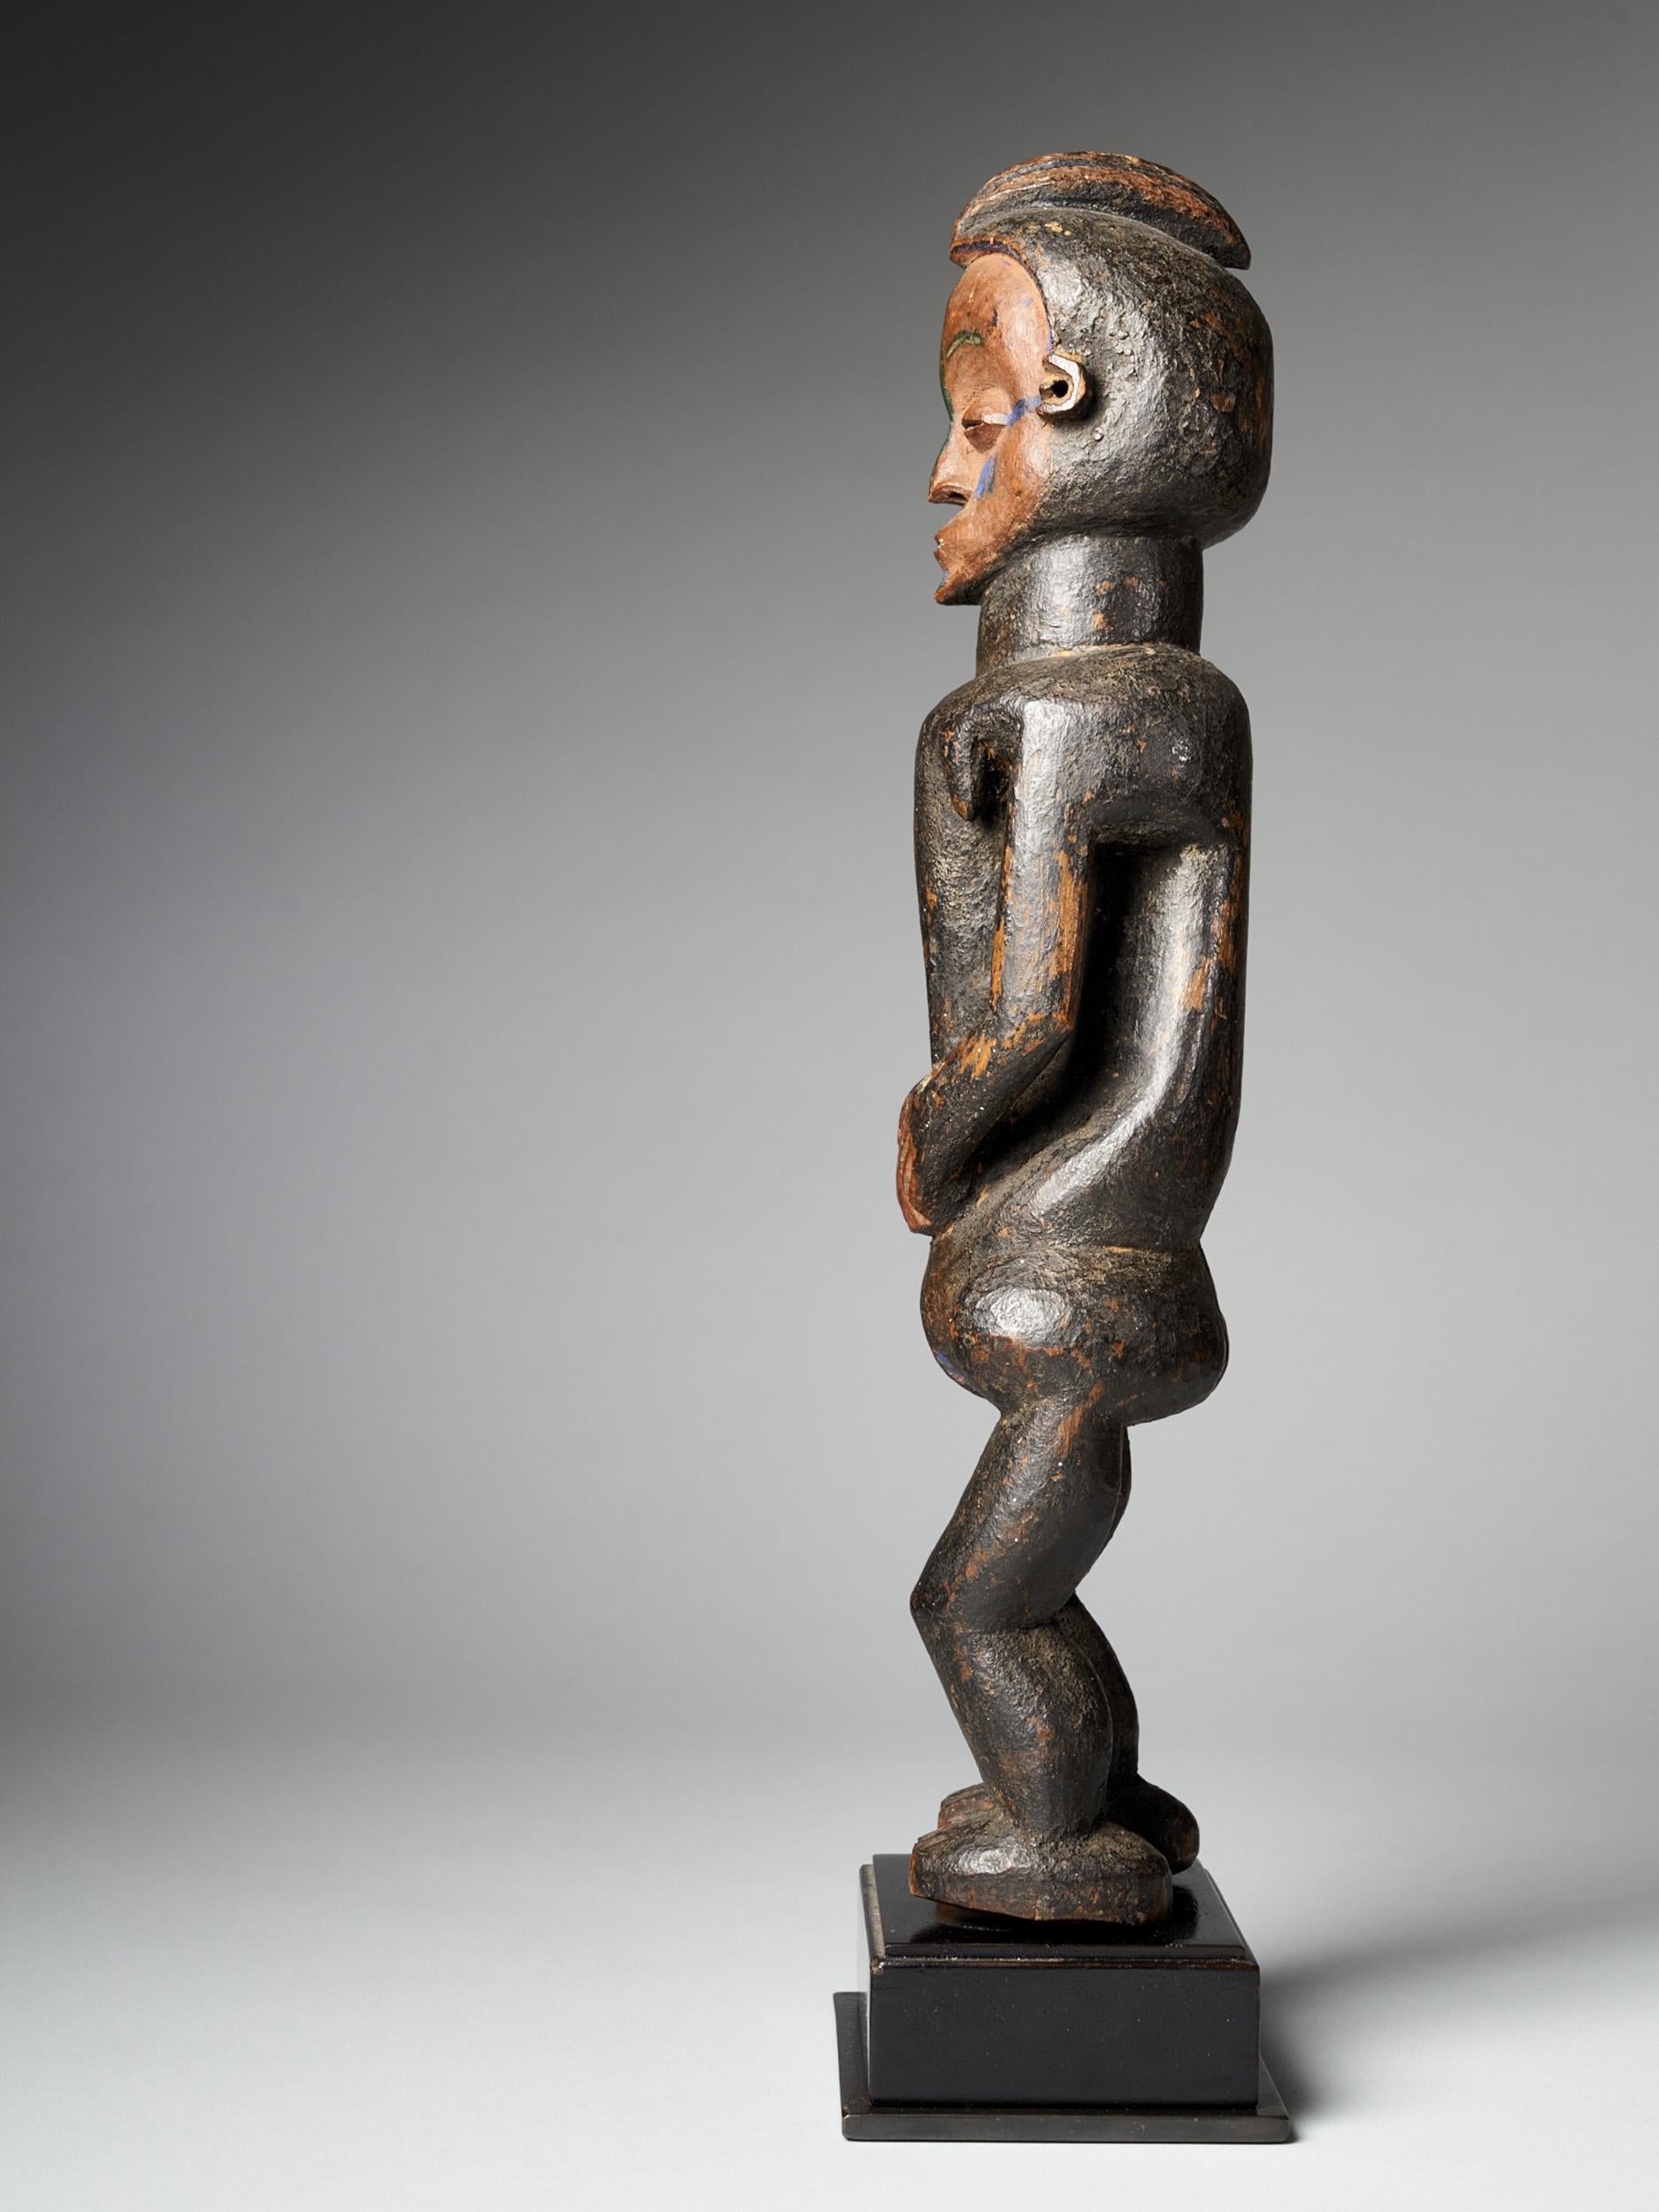 The Cult statue Mvunzi, represents an Ancestor carved with slightly bent legs and her hands joining the abdomen. The crested hairdo, proportioned body, scarified face with coffee-bean eyes, bent legs, and blue polychrome characterizes their Holo’s